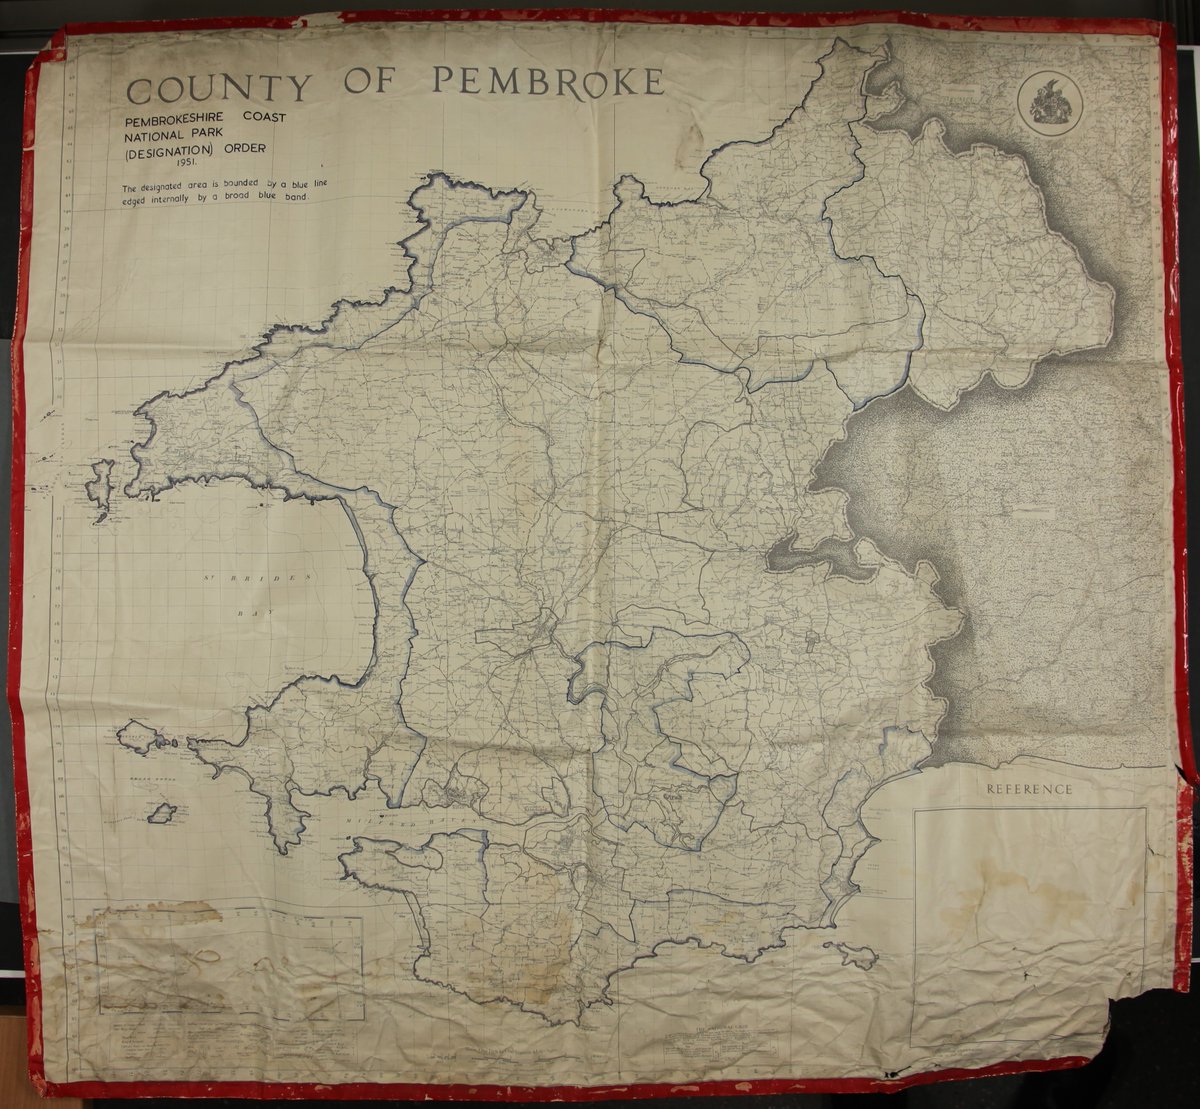 On this day in 1952 Pembrokeshire Coast National Park was designated a national park. Held by @PembsArchives, this map was part of the 1951 Pembrokeshire Coast National Park Designation Order. The park covers a total area of around 240 square miles! Have you ever visited?